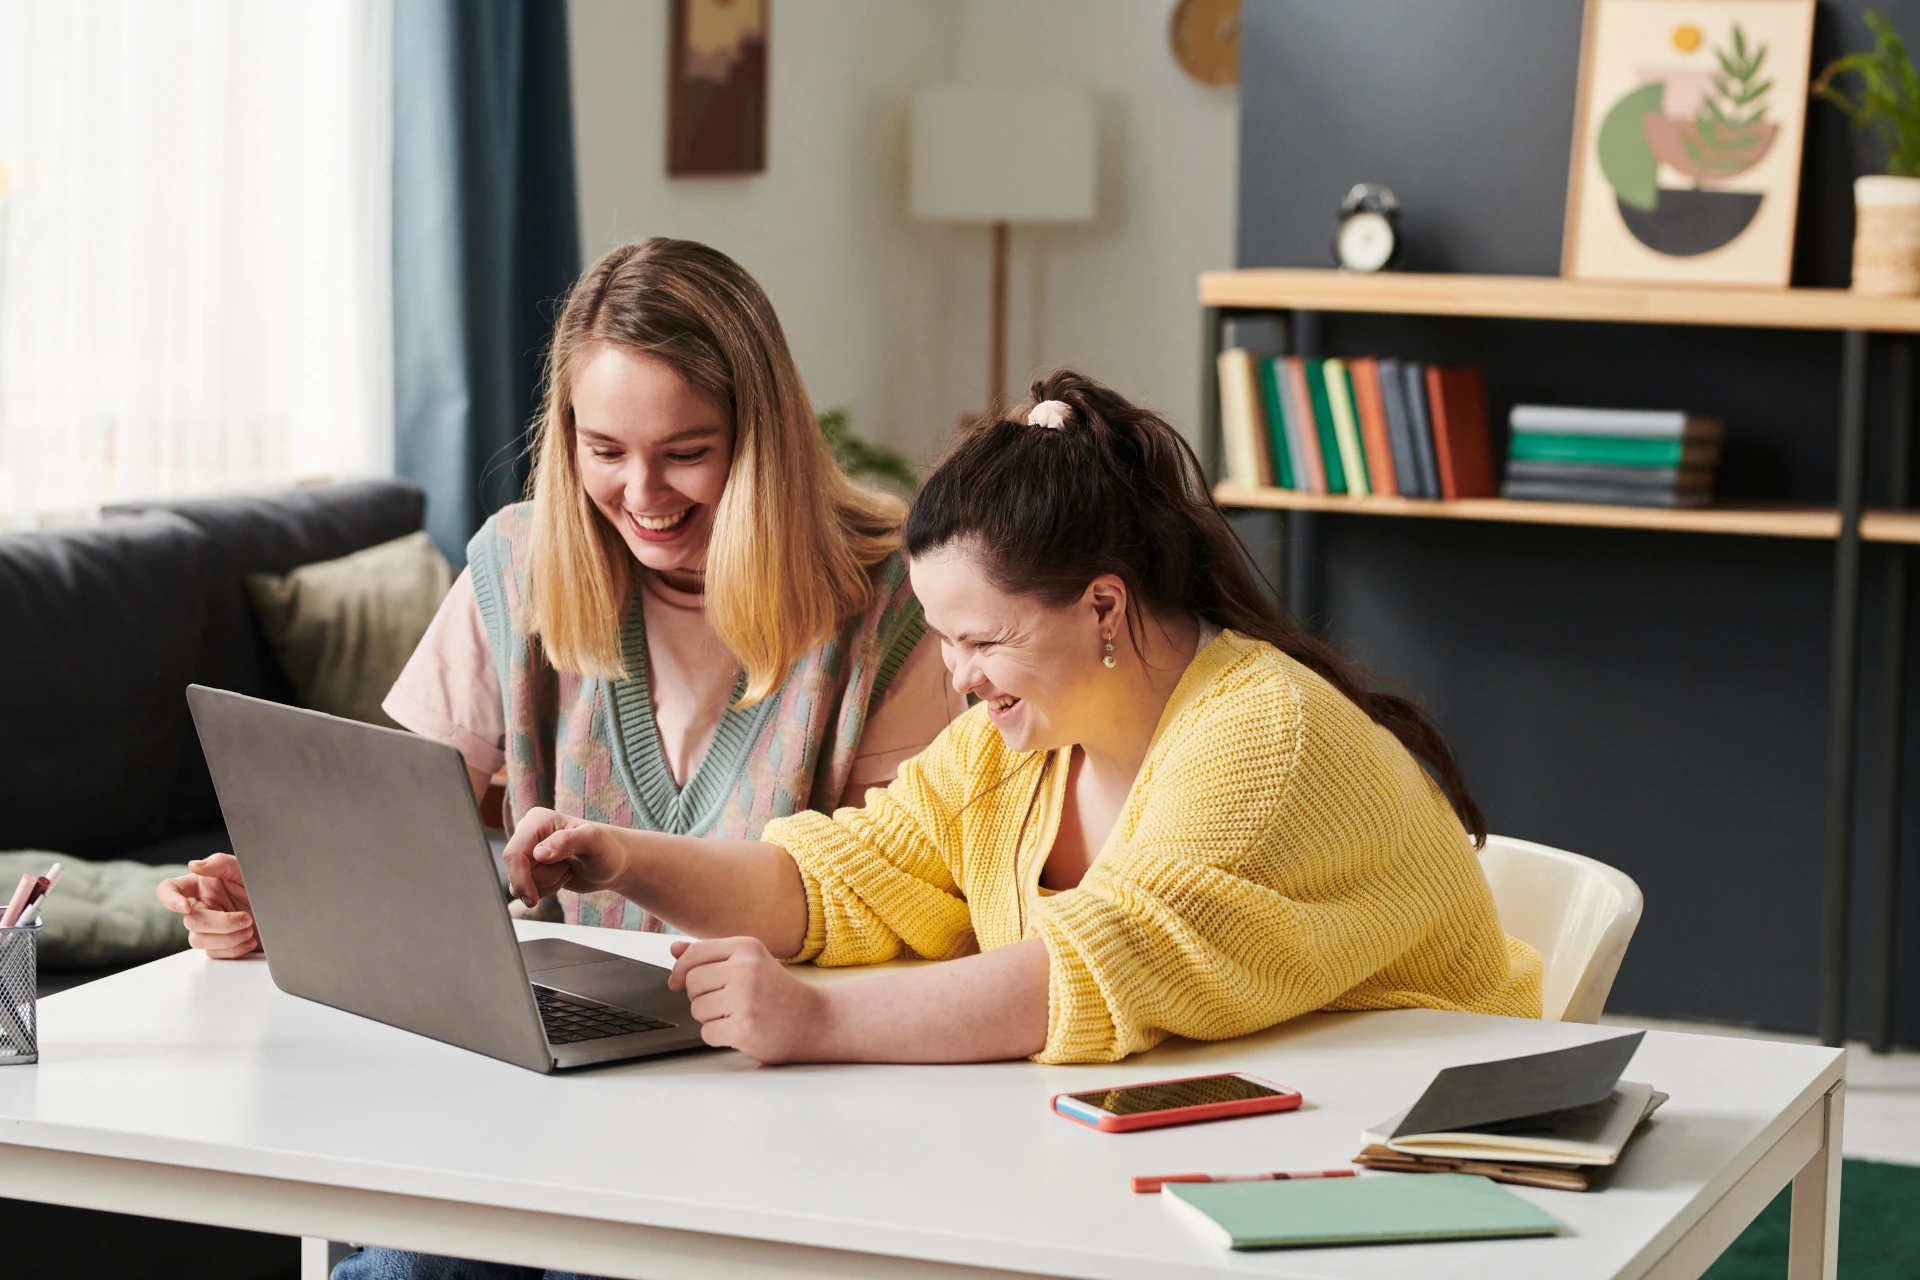 A woman and girl smiling at a laptop